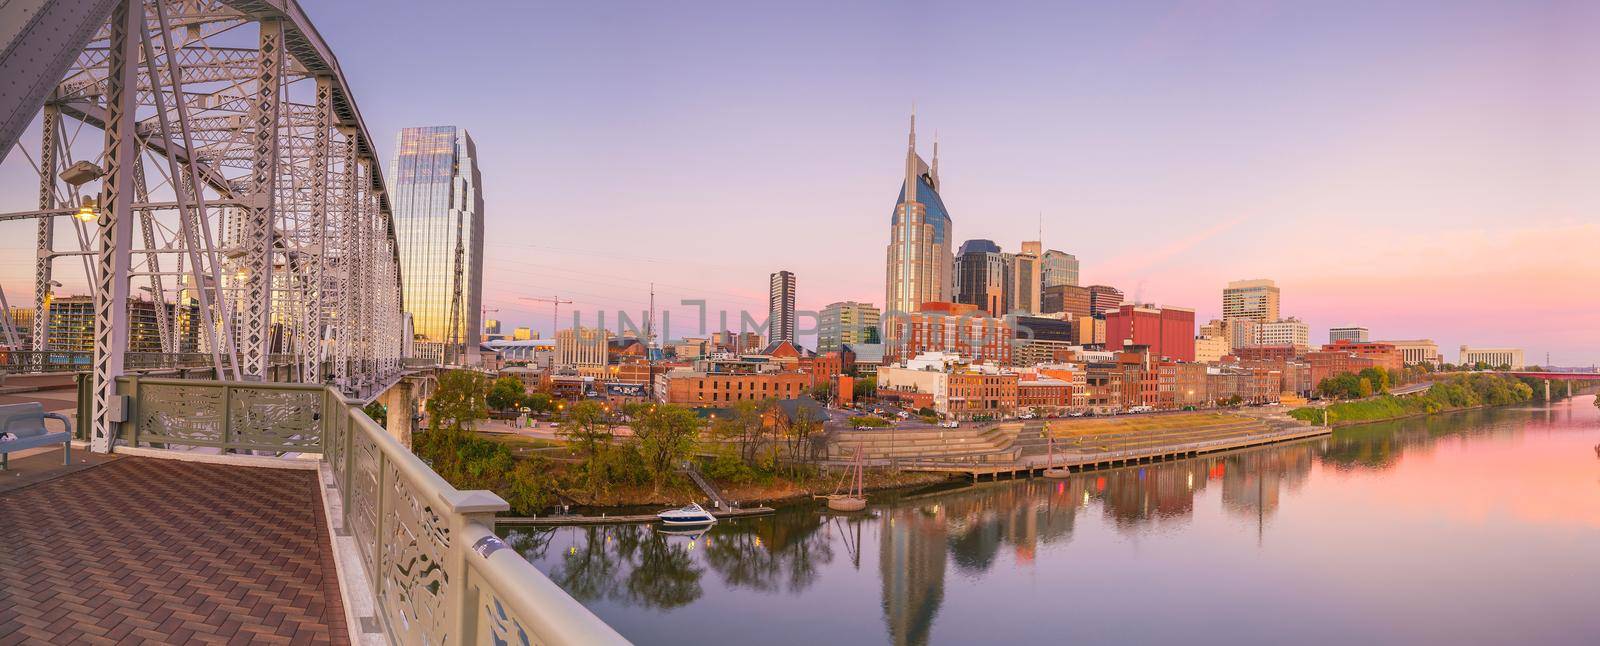 Nashville, Tennessee downtown skyline  by f11photo